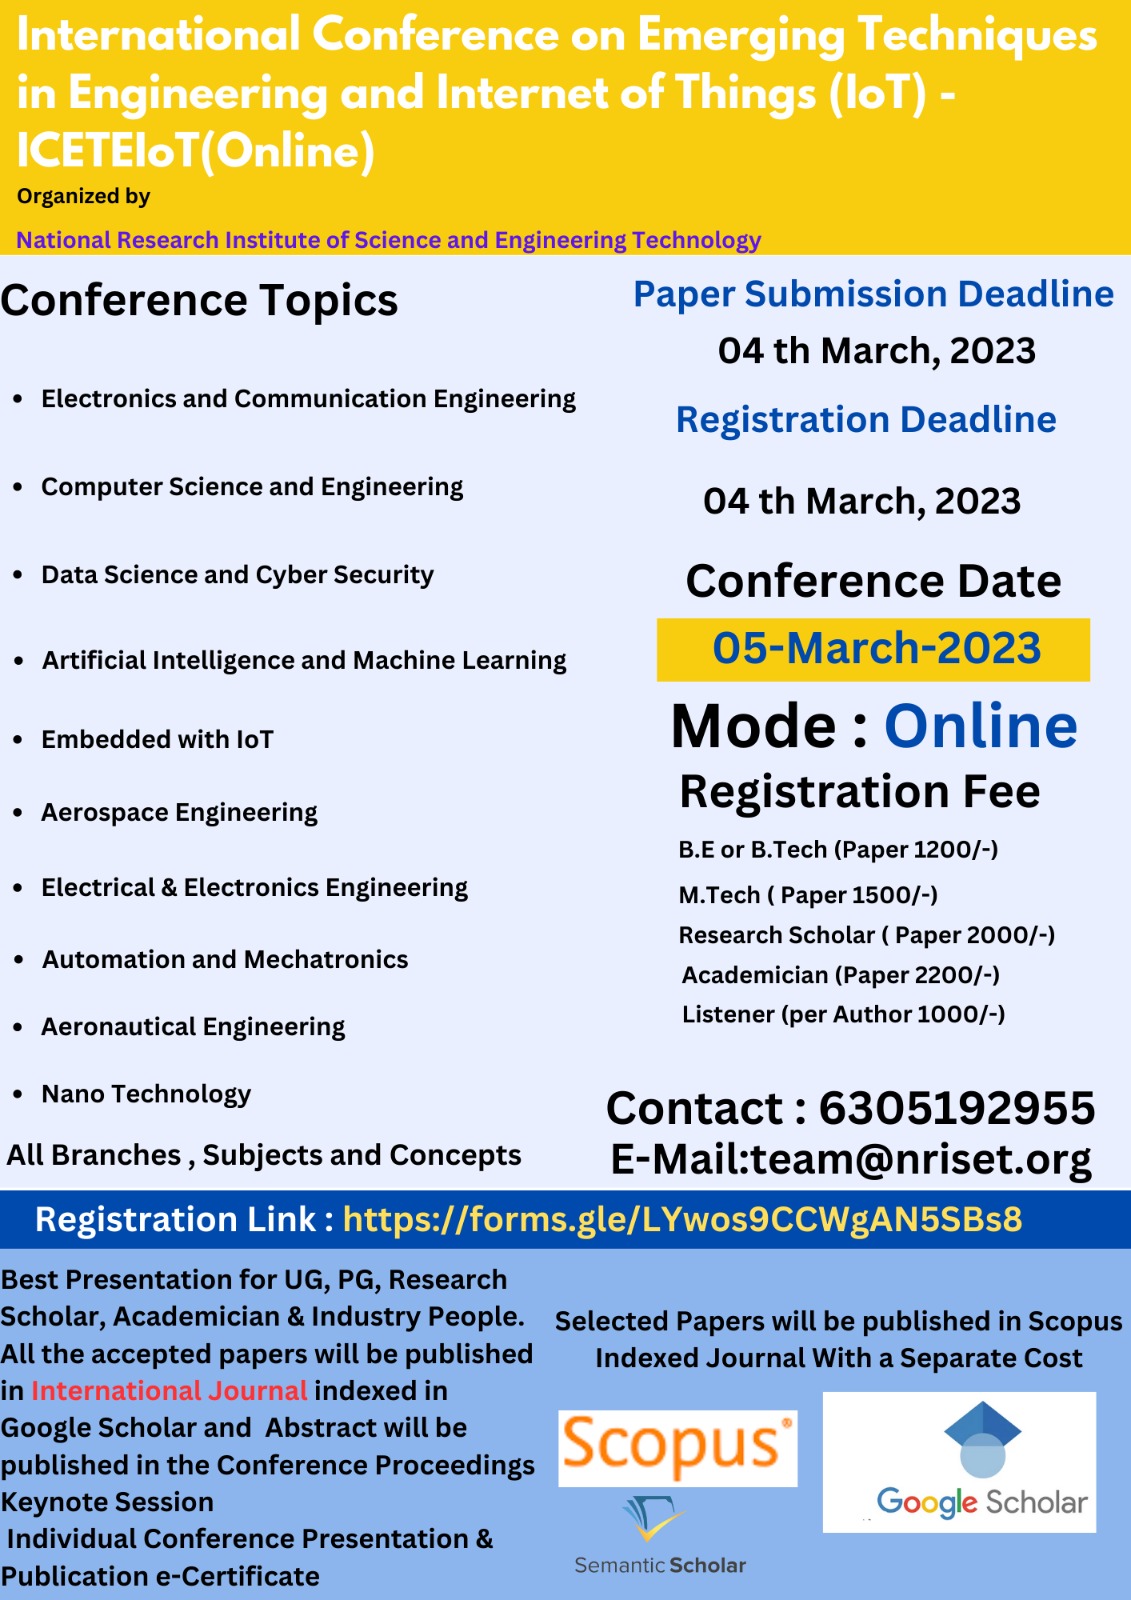 International Conference on Emerging Techniques in Engineering and Internet of Things (IoT) - ICETEIoT:(Online)